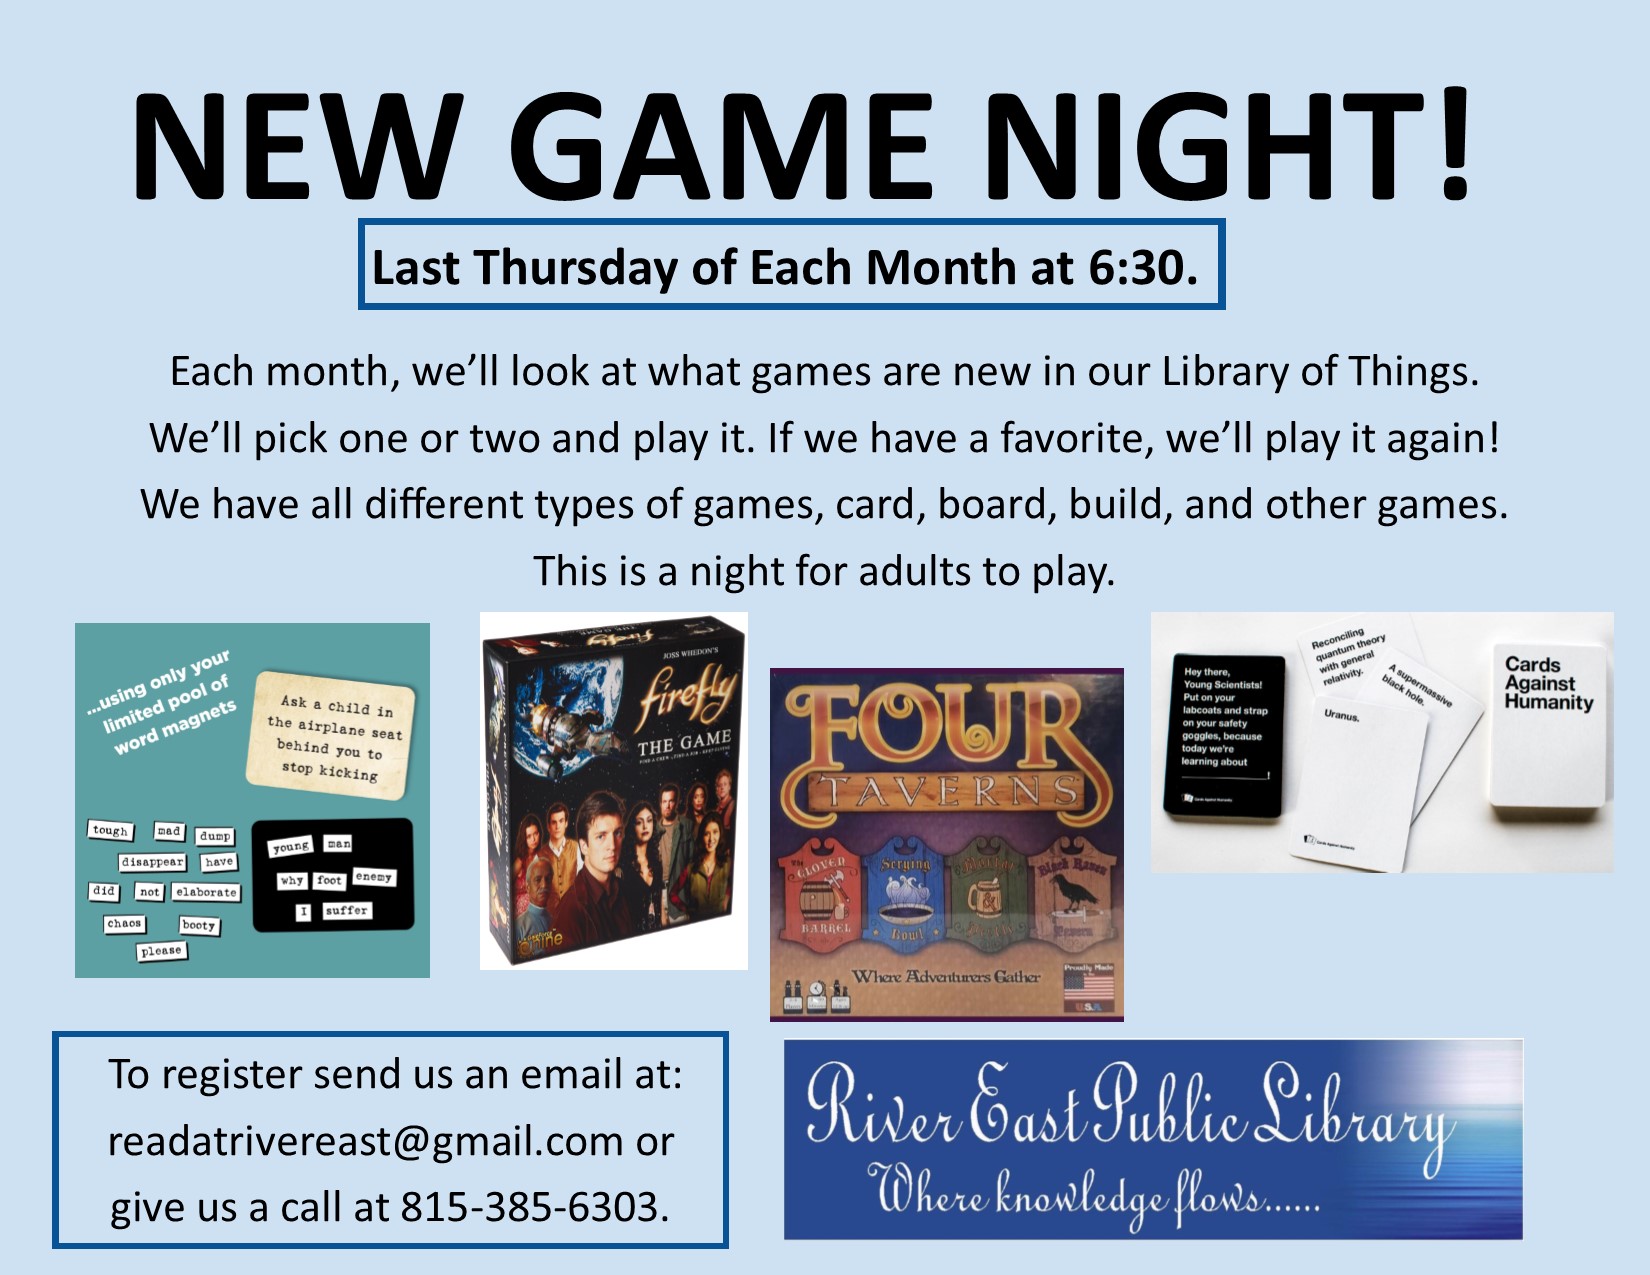 Poster advertising our upcoming new game night